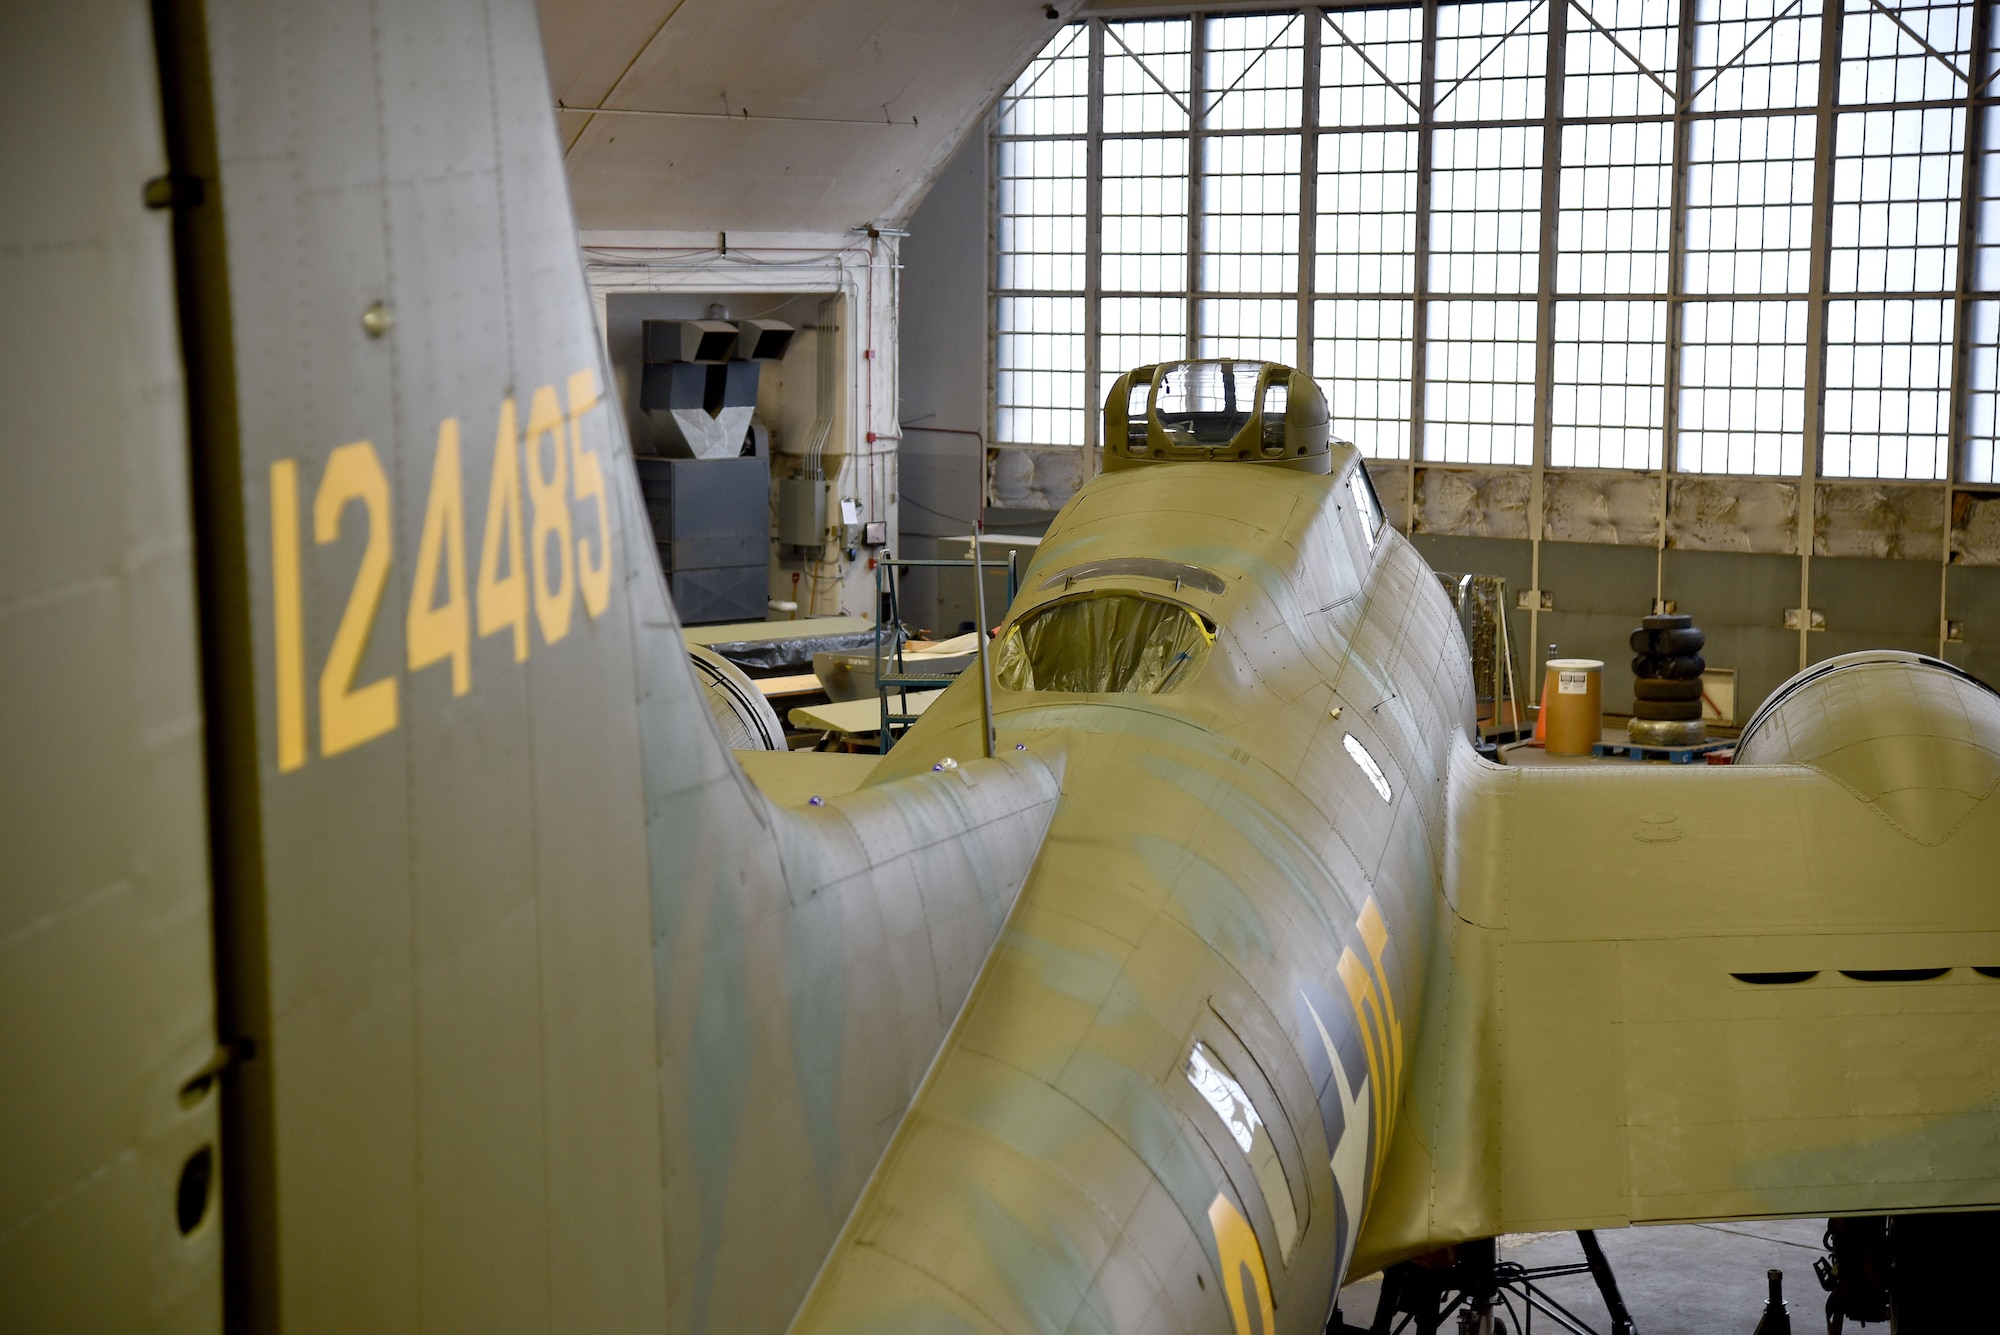 DAYTON, Ohio (12/28/2017) -- National Museum of the U.S. Air Force restoration crews install the flight control surfaces on the Boeing B-17F Memphis Belle™. Plans call for the aircraft to be placed on permanent public display in the WWII Gallery here at the National Museum of the U.S. Air Force on May 17, 2018. (U.S. Air Force photo by Ken LaRock)